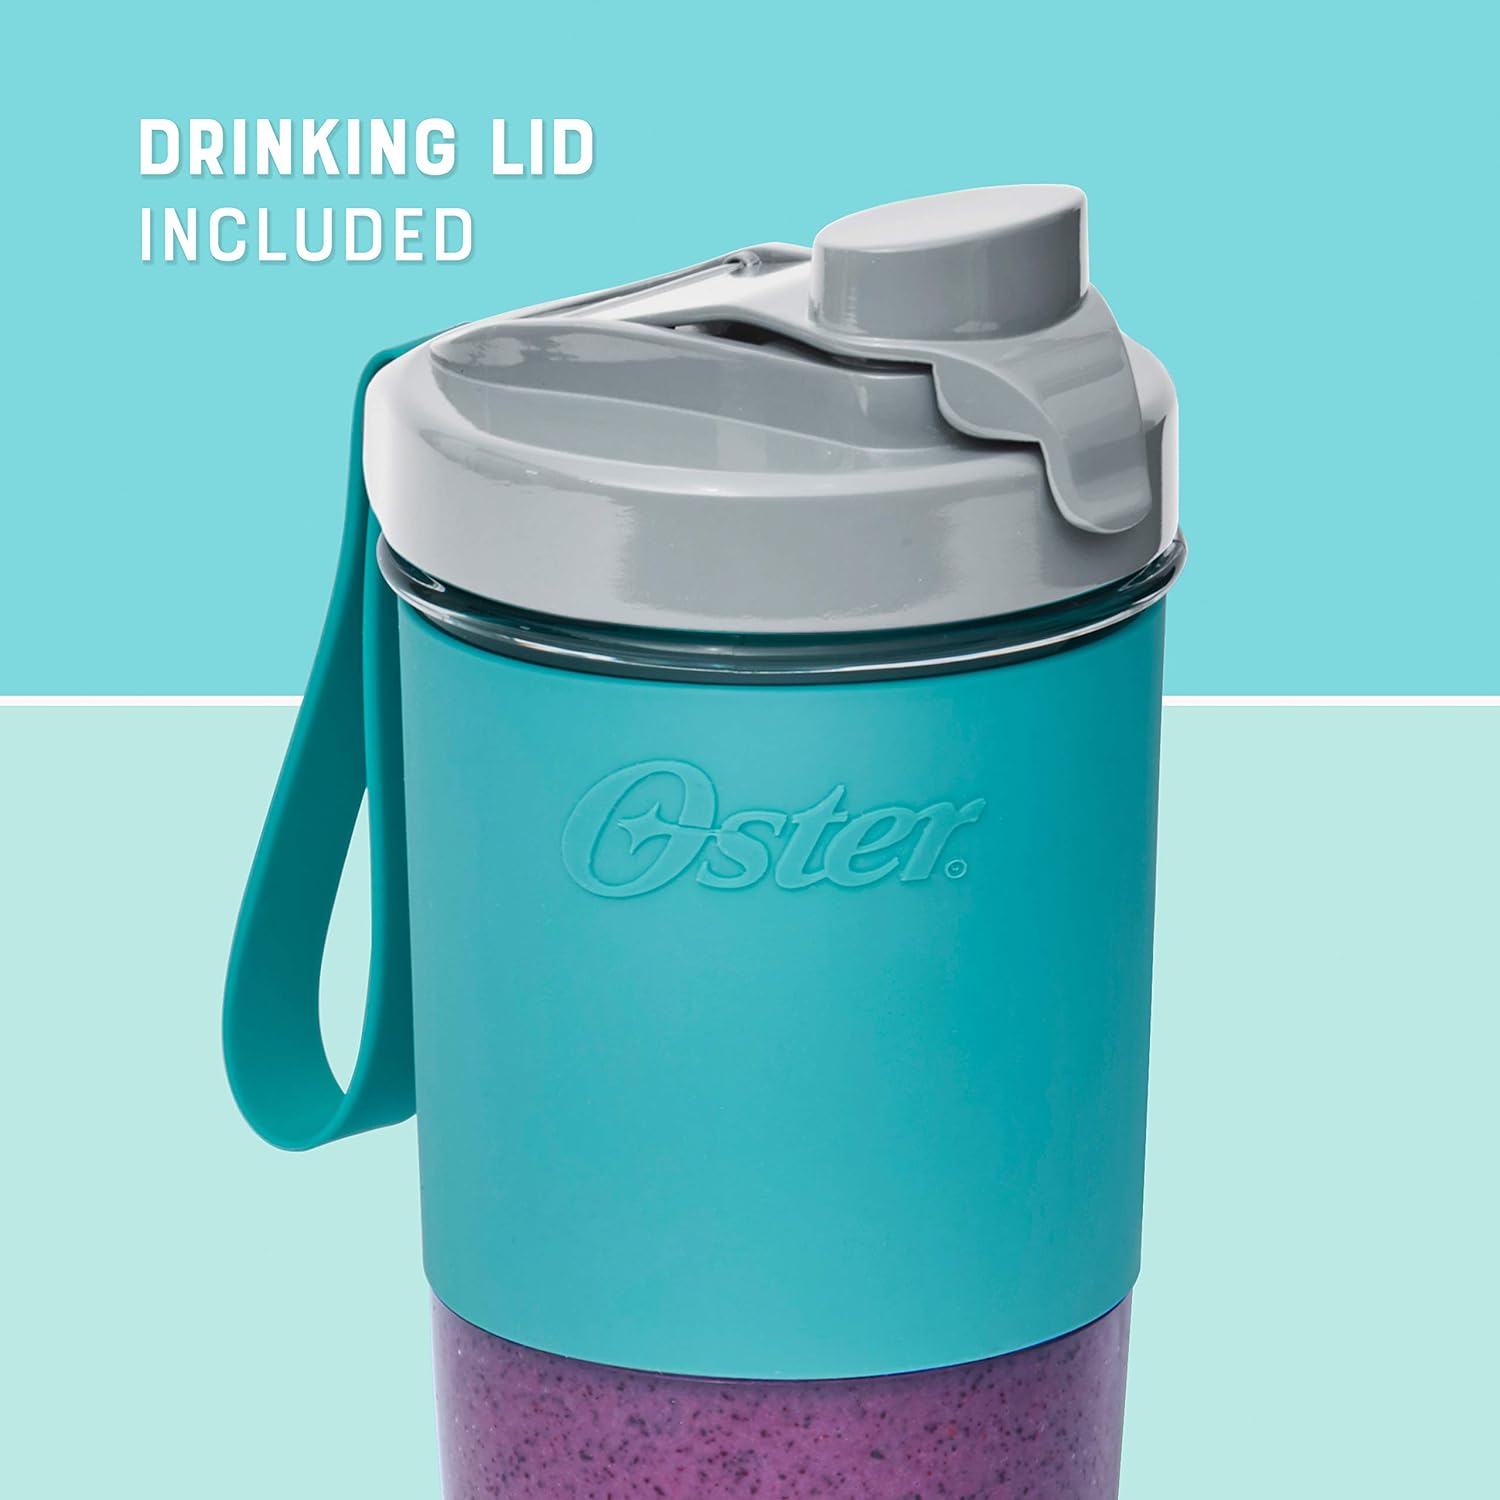 Oster Blend Active Portable Blender with Drinking Lid, USB Chargeable Personal Blender, Teal